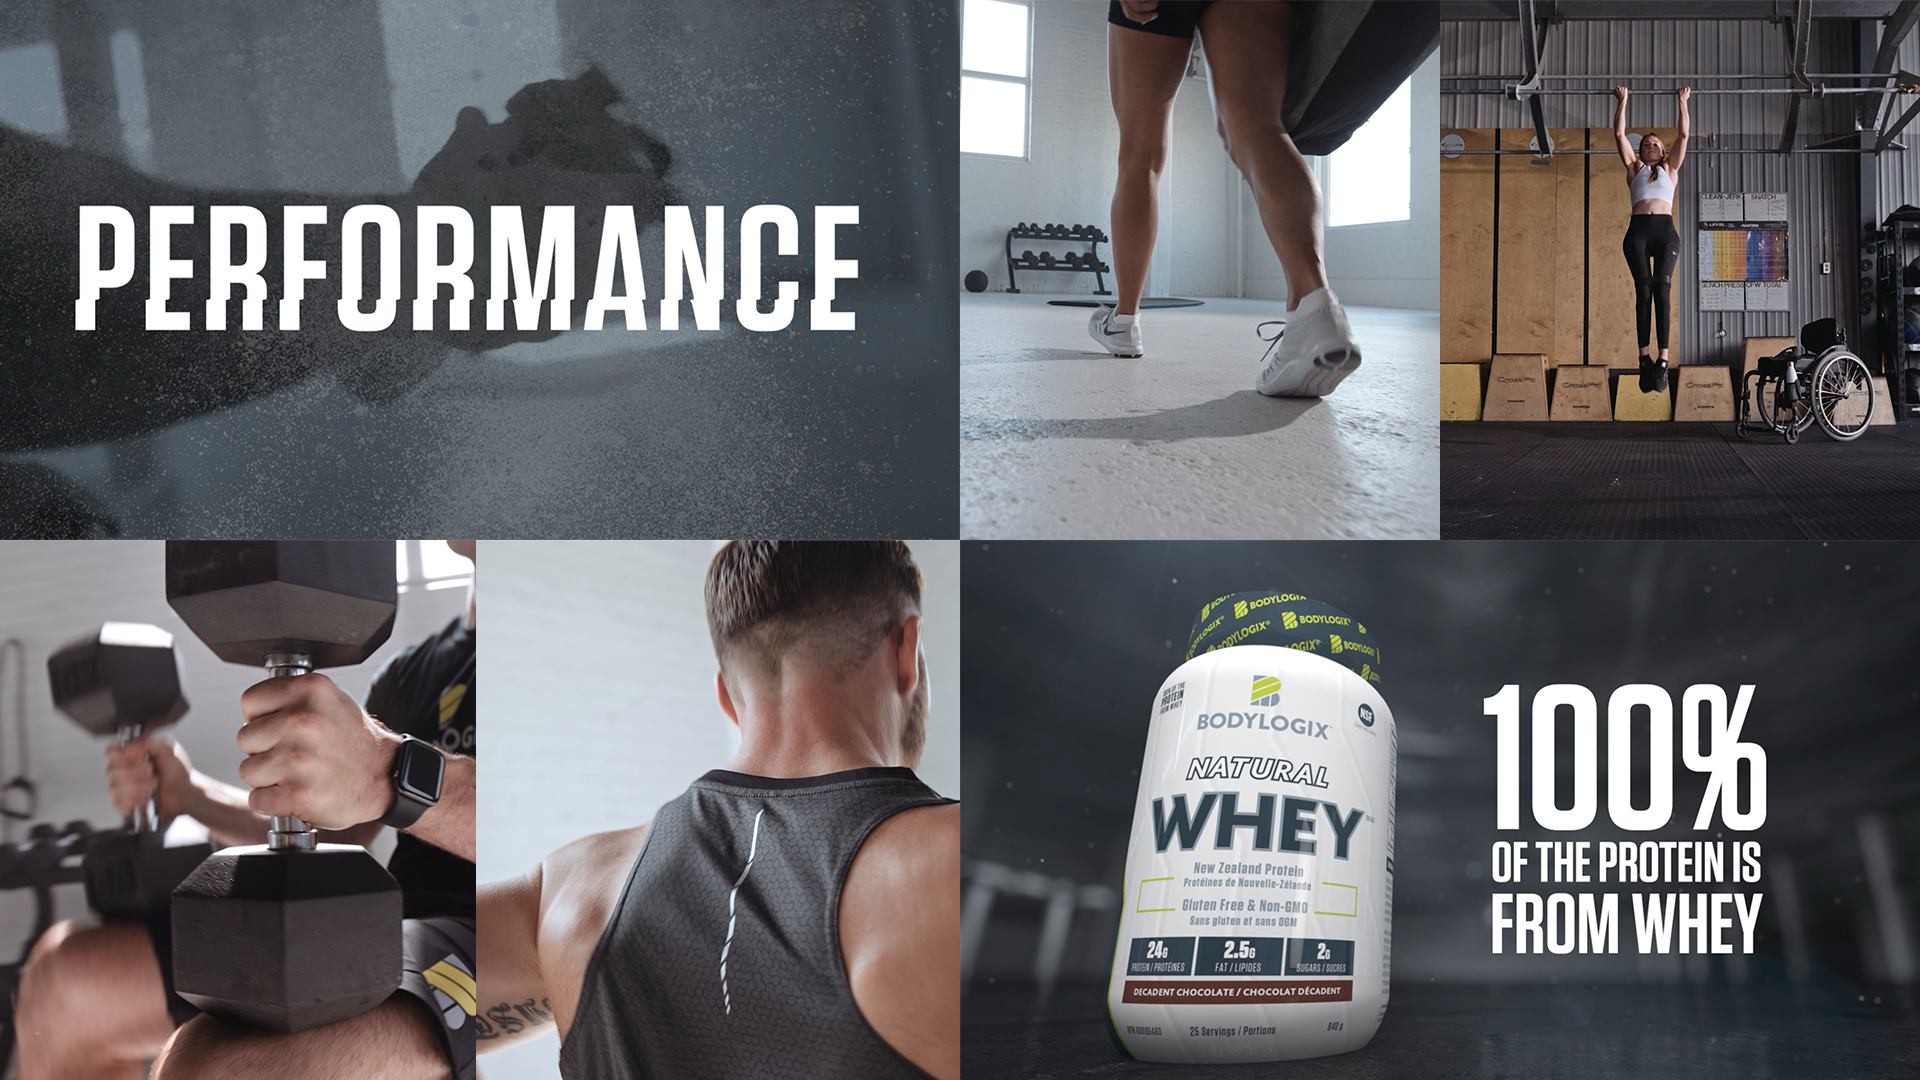 A collage of style frame images, featuring the word "Performance," a close up shot of a person's feet walking into a gym, a woman performing pull ups, and a container of Bodylogix protein powder.